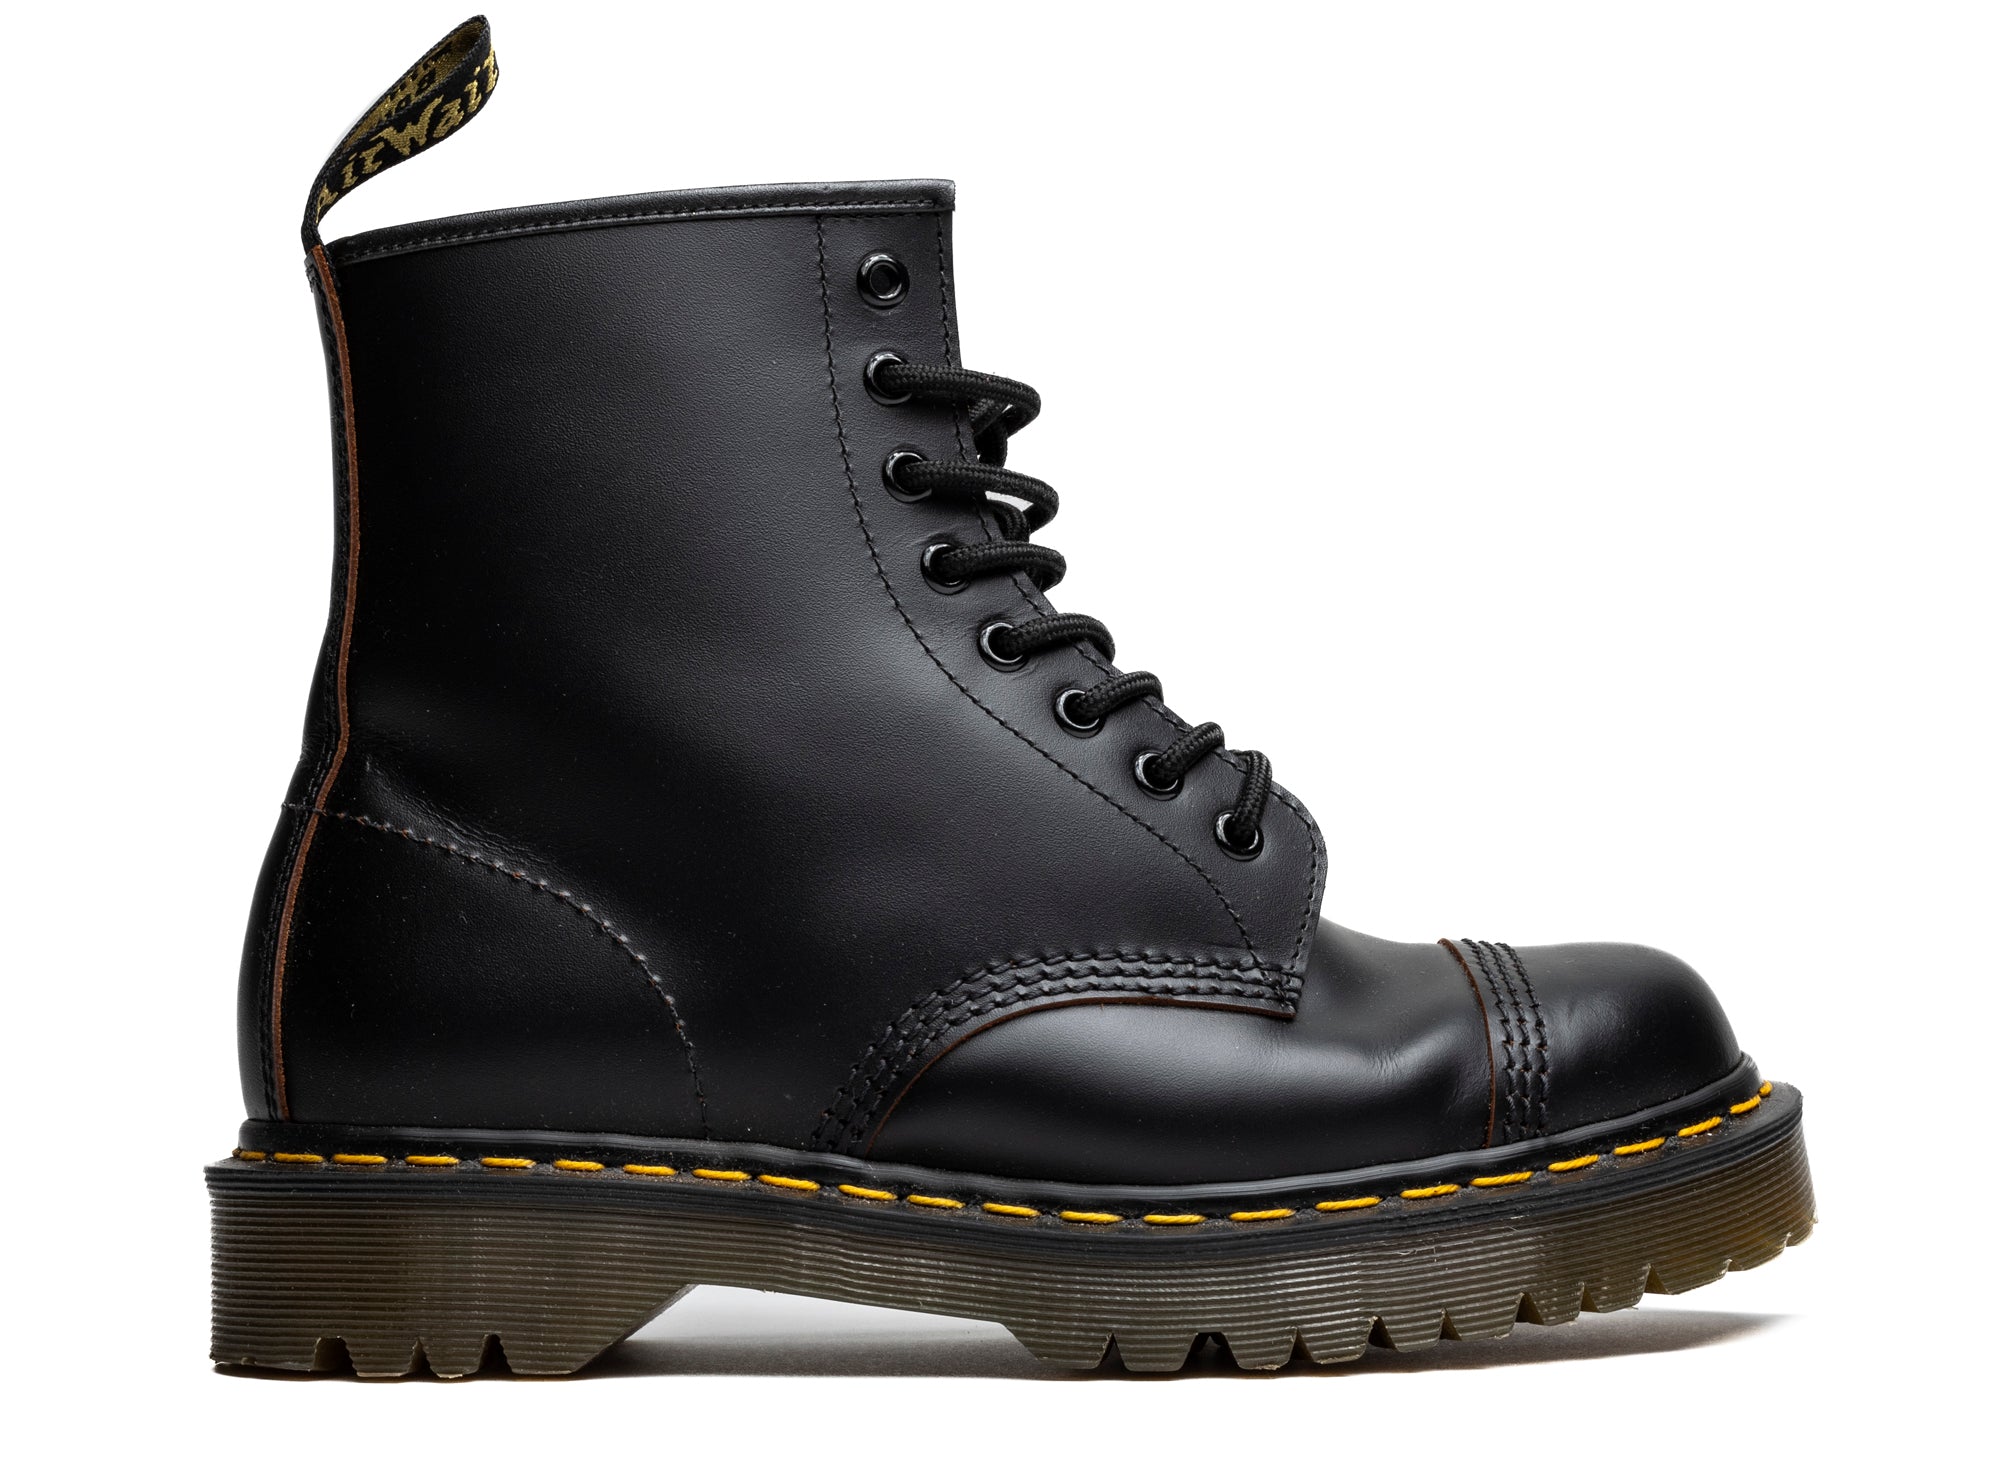 Dr. Martens 1460 Bex Made in England Toe Cap Boots xld – Oneness Boutique